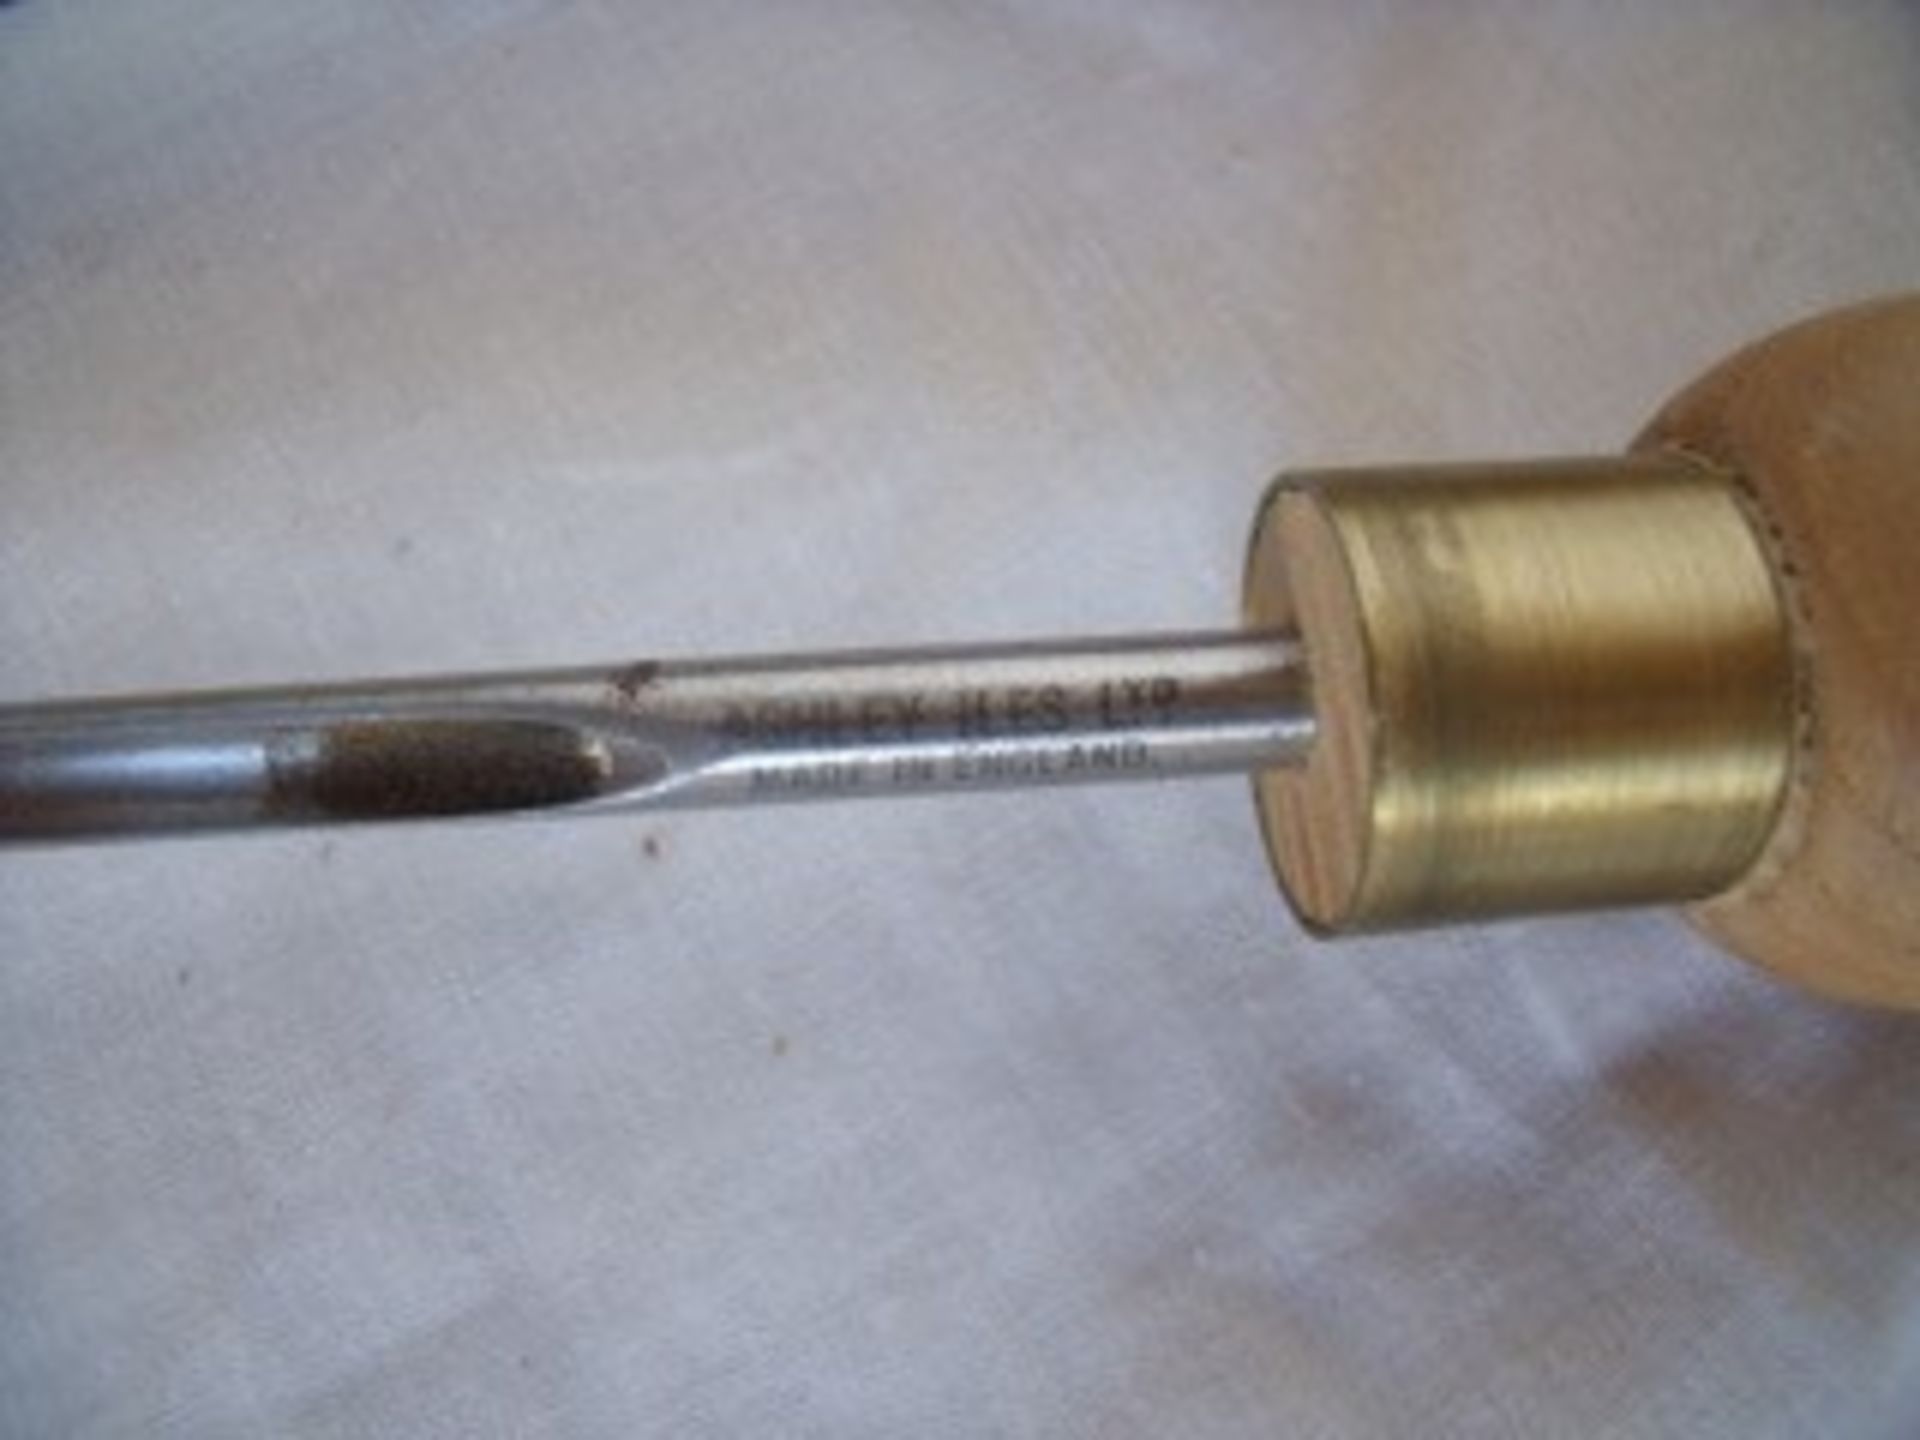 Selection of 15 Wood Turning Cutting Tools By Robert Sorby And Ashley Isles - Image 3 of 6